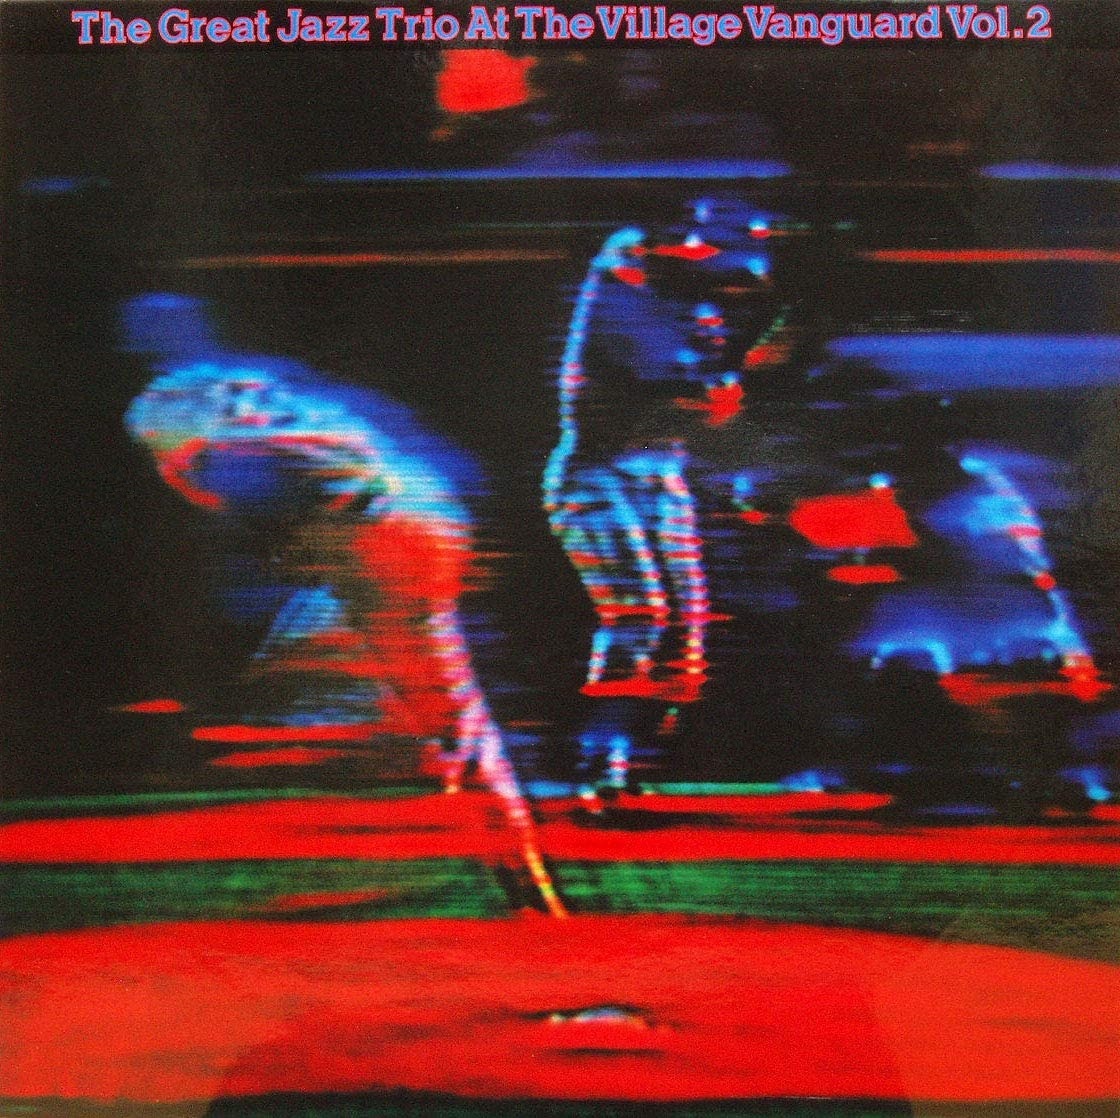 The Great Jazz Trio At The Village Vanguard Vol.2 East Wind EW-8055